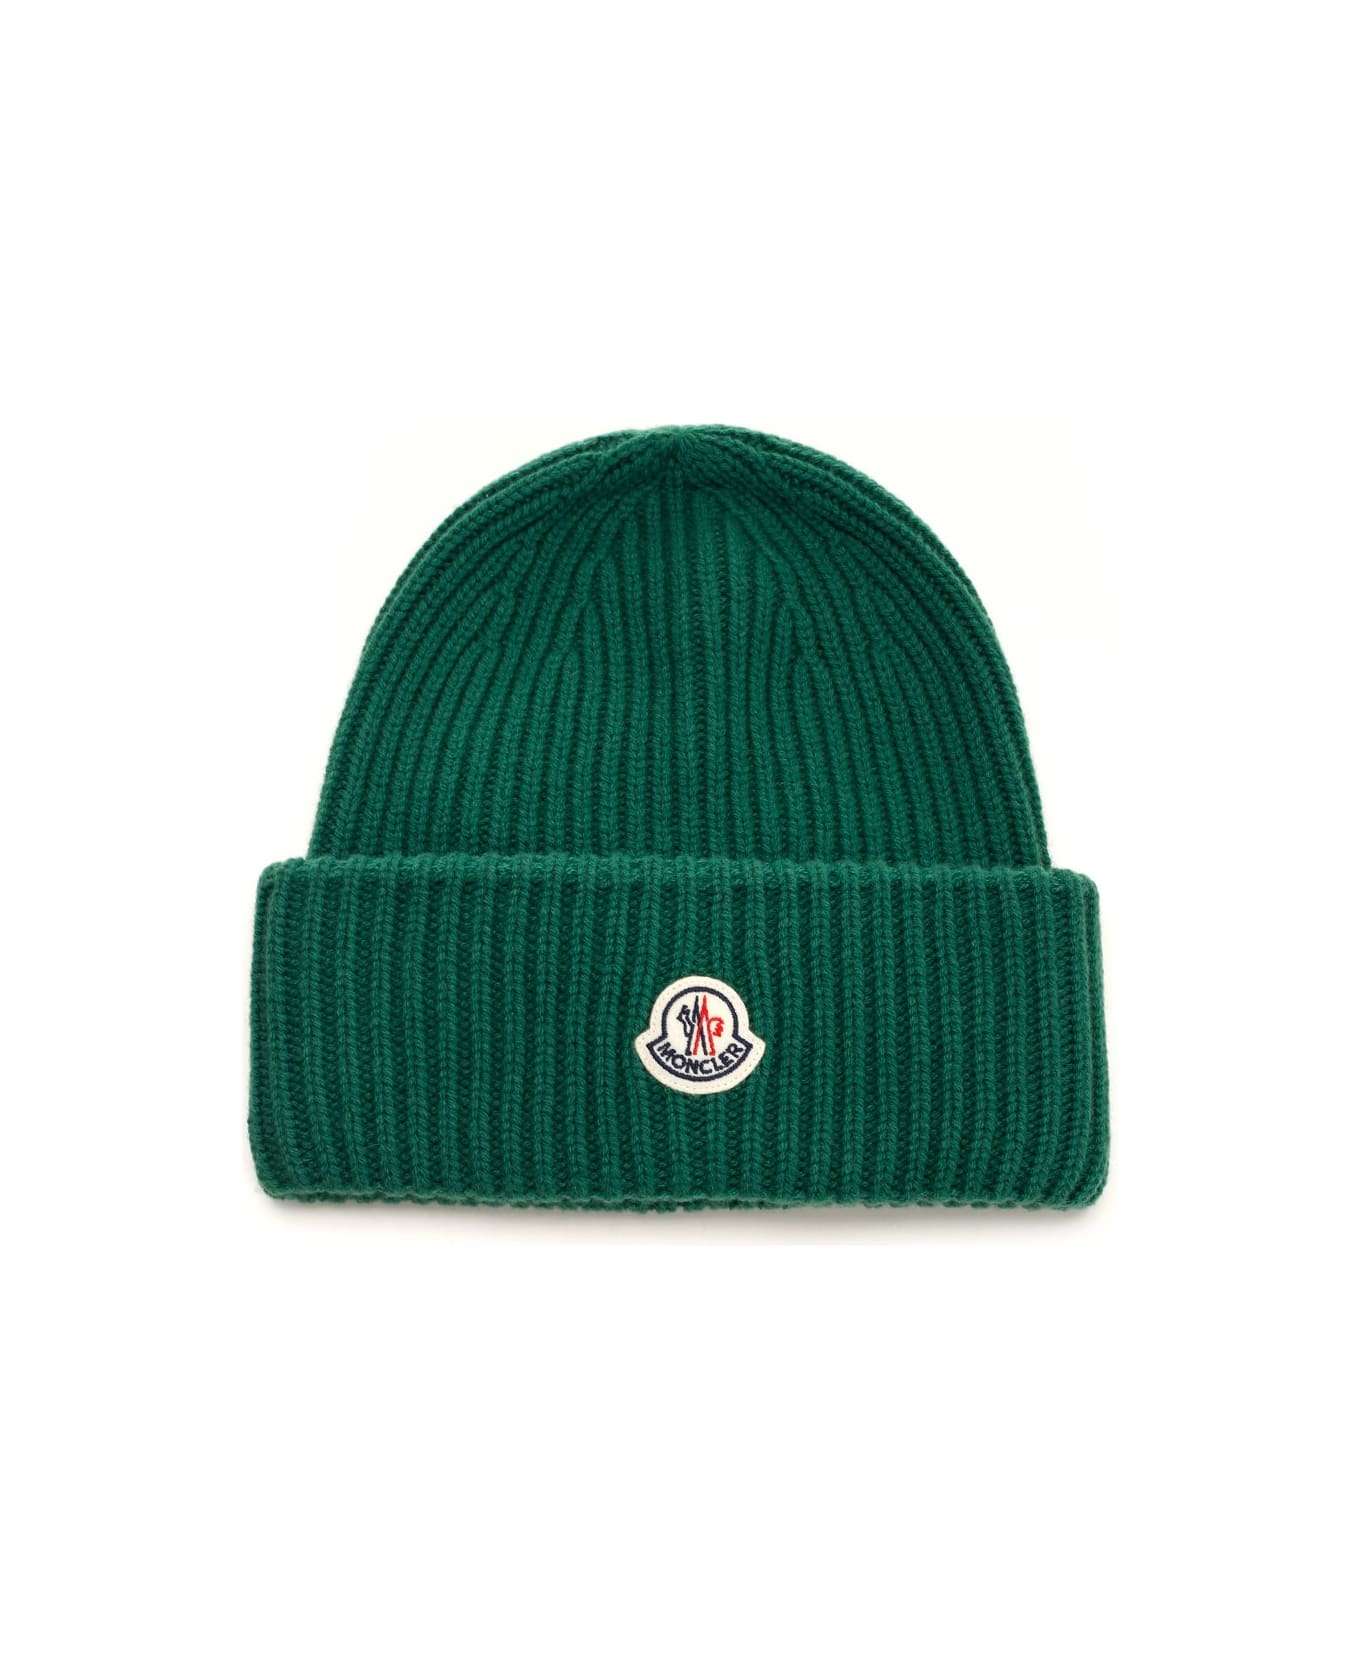 Moncler Wool And Cashmere Beanie - Green 帽子